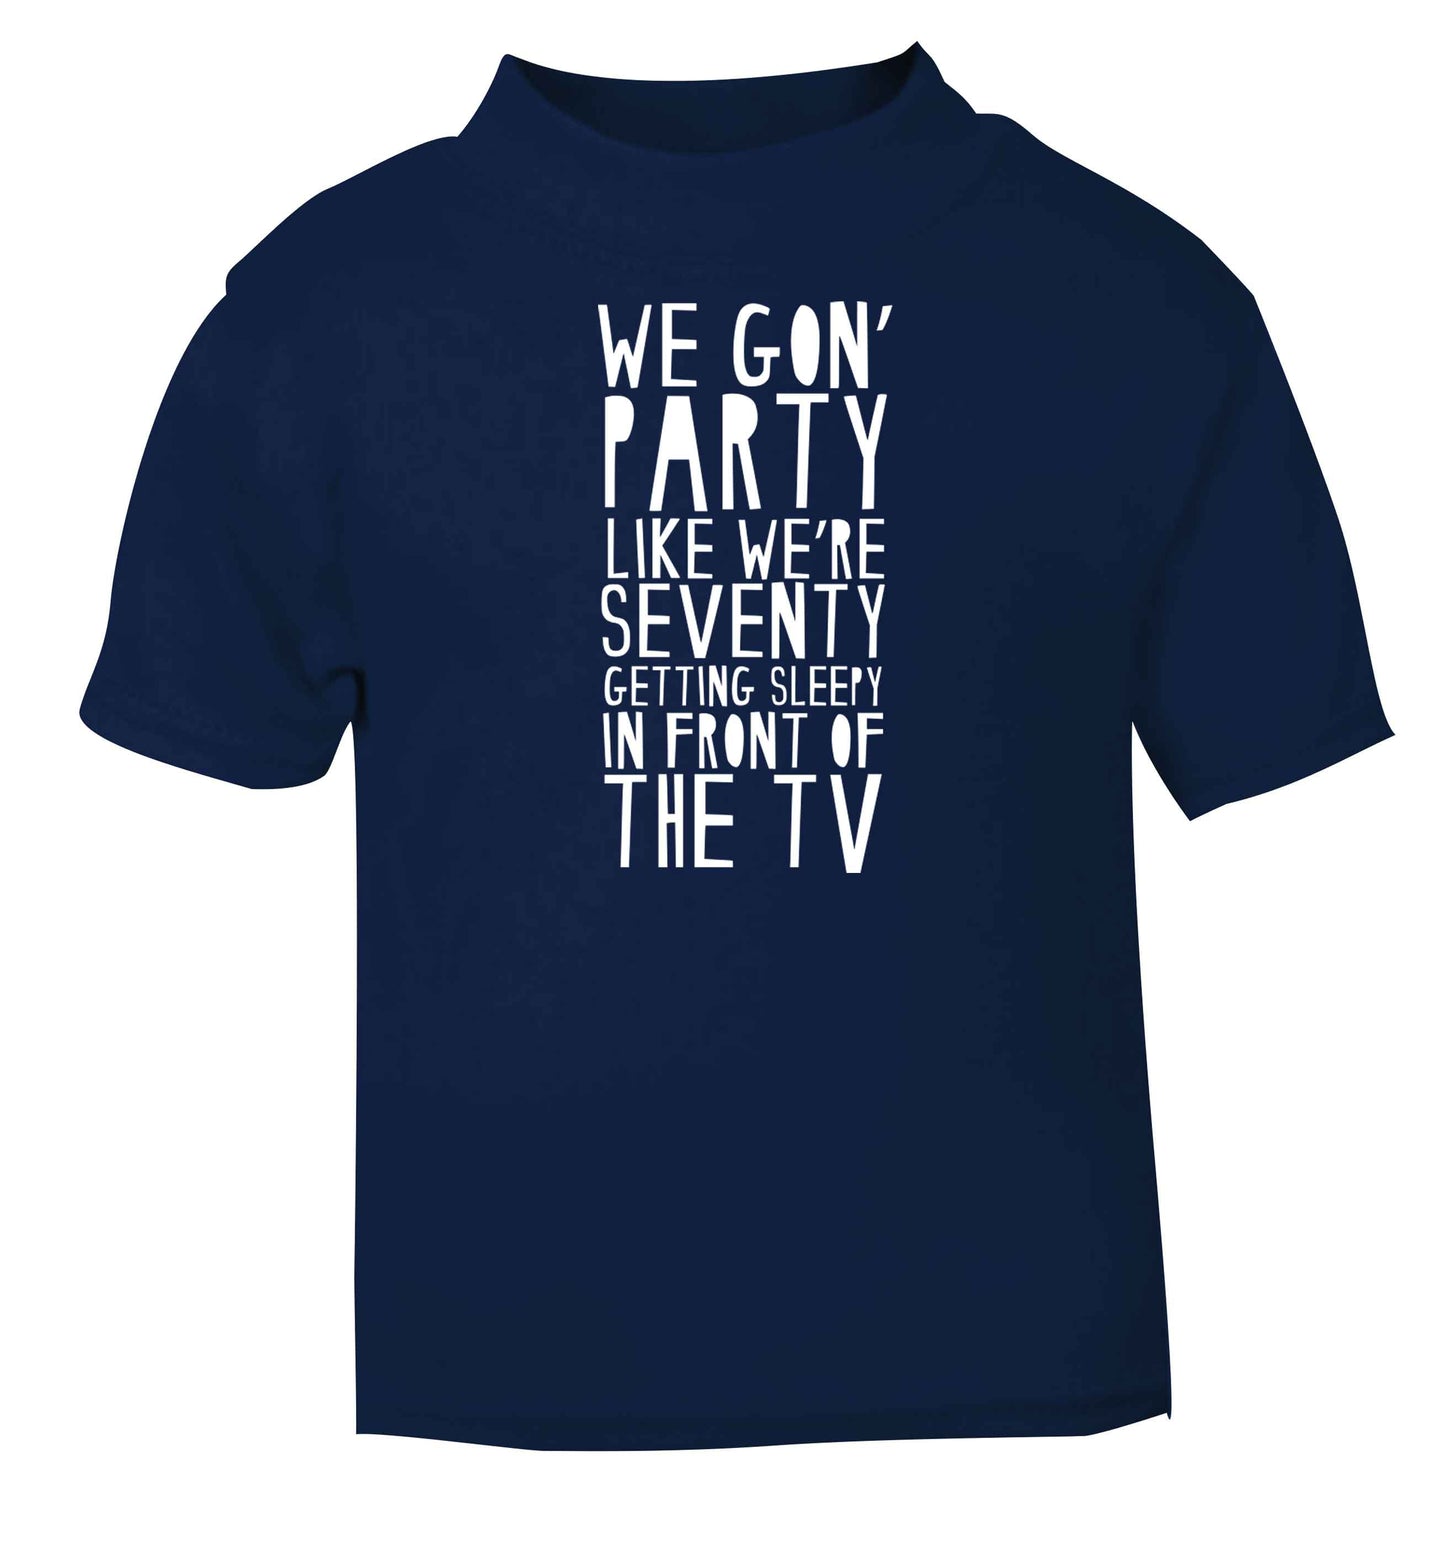 We gon' party like we're seventy getting sleepy in front of the TV navy baby toddler Tshirt 2 Years